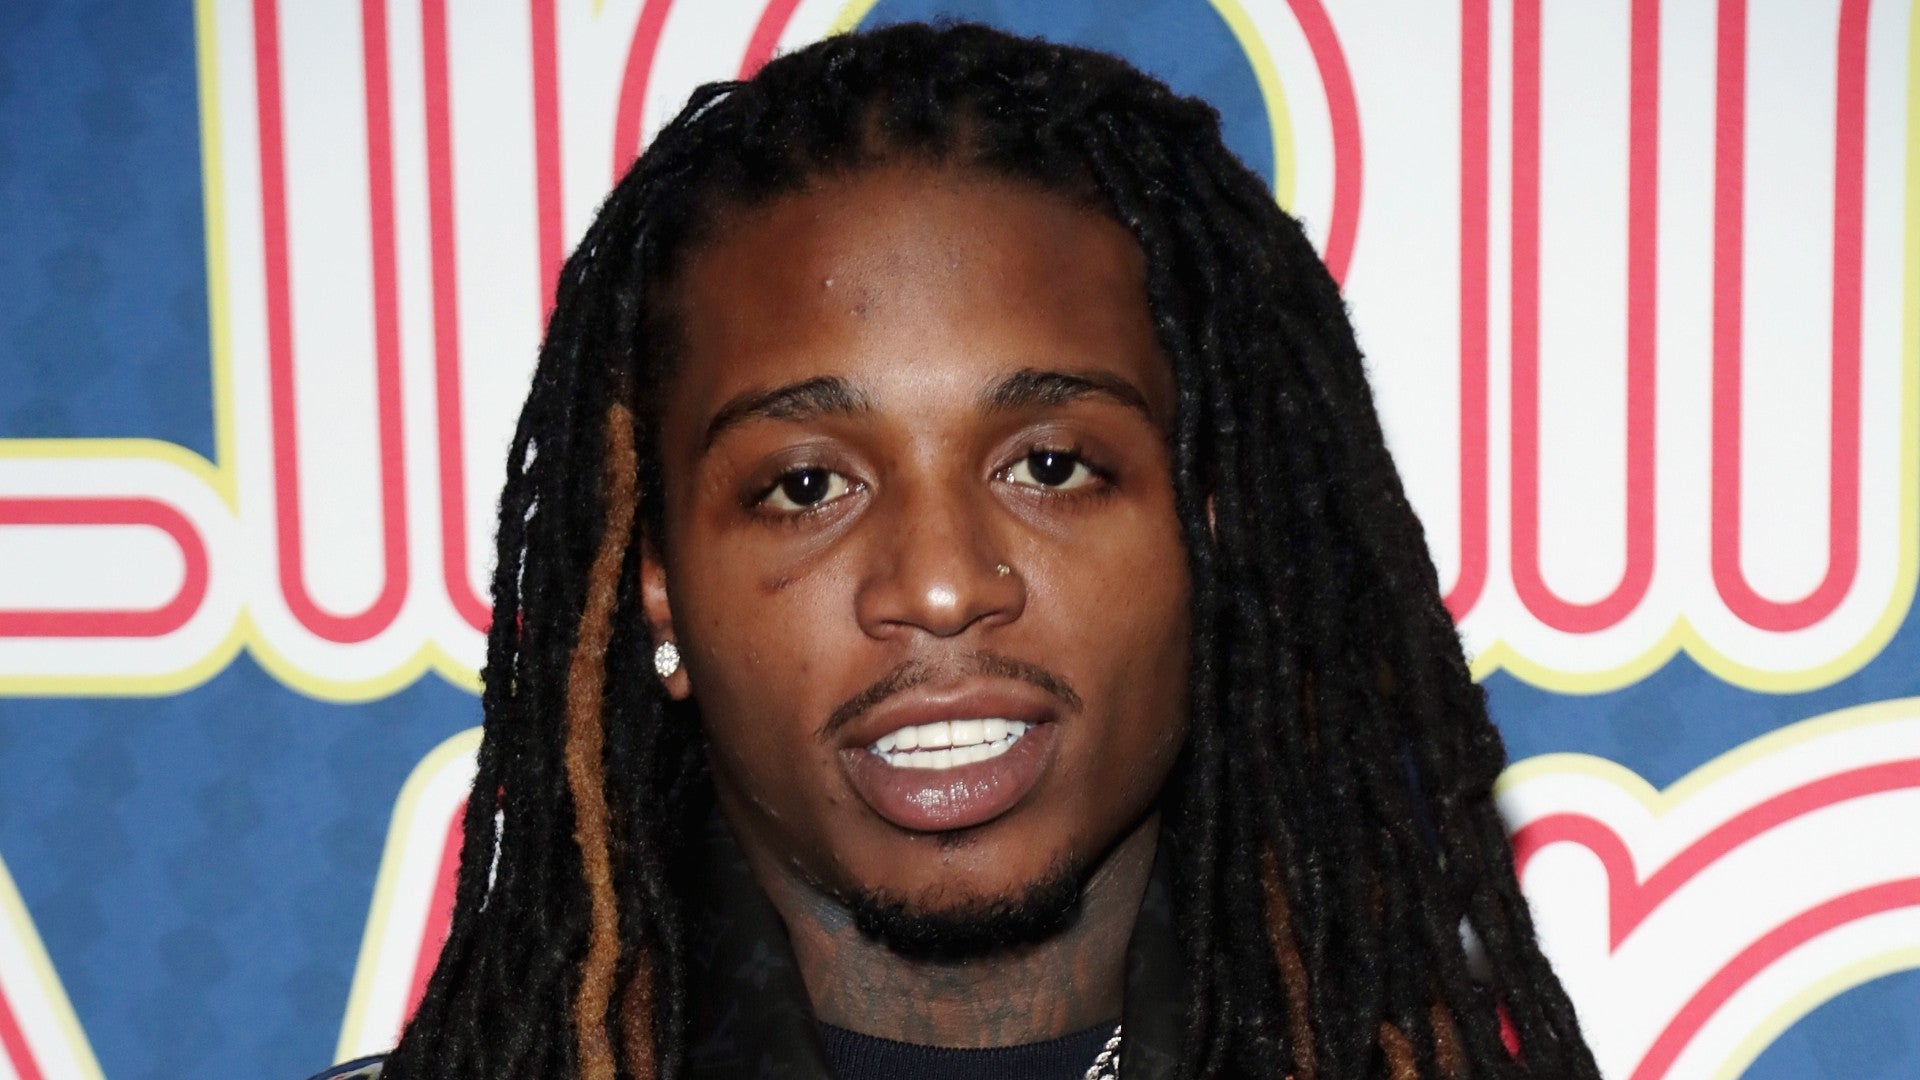 Jacquees's Latest Hairstyle Has Fans In their Feelings - Essence